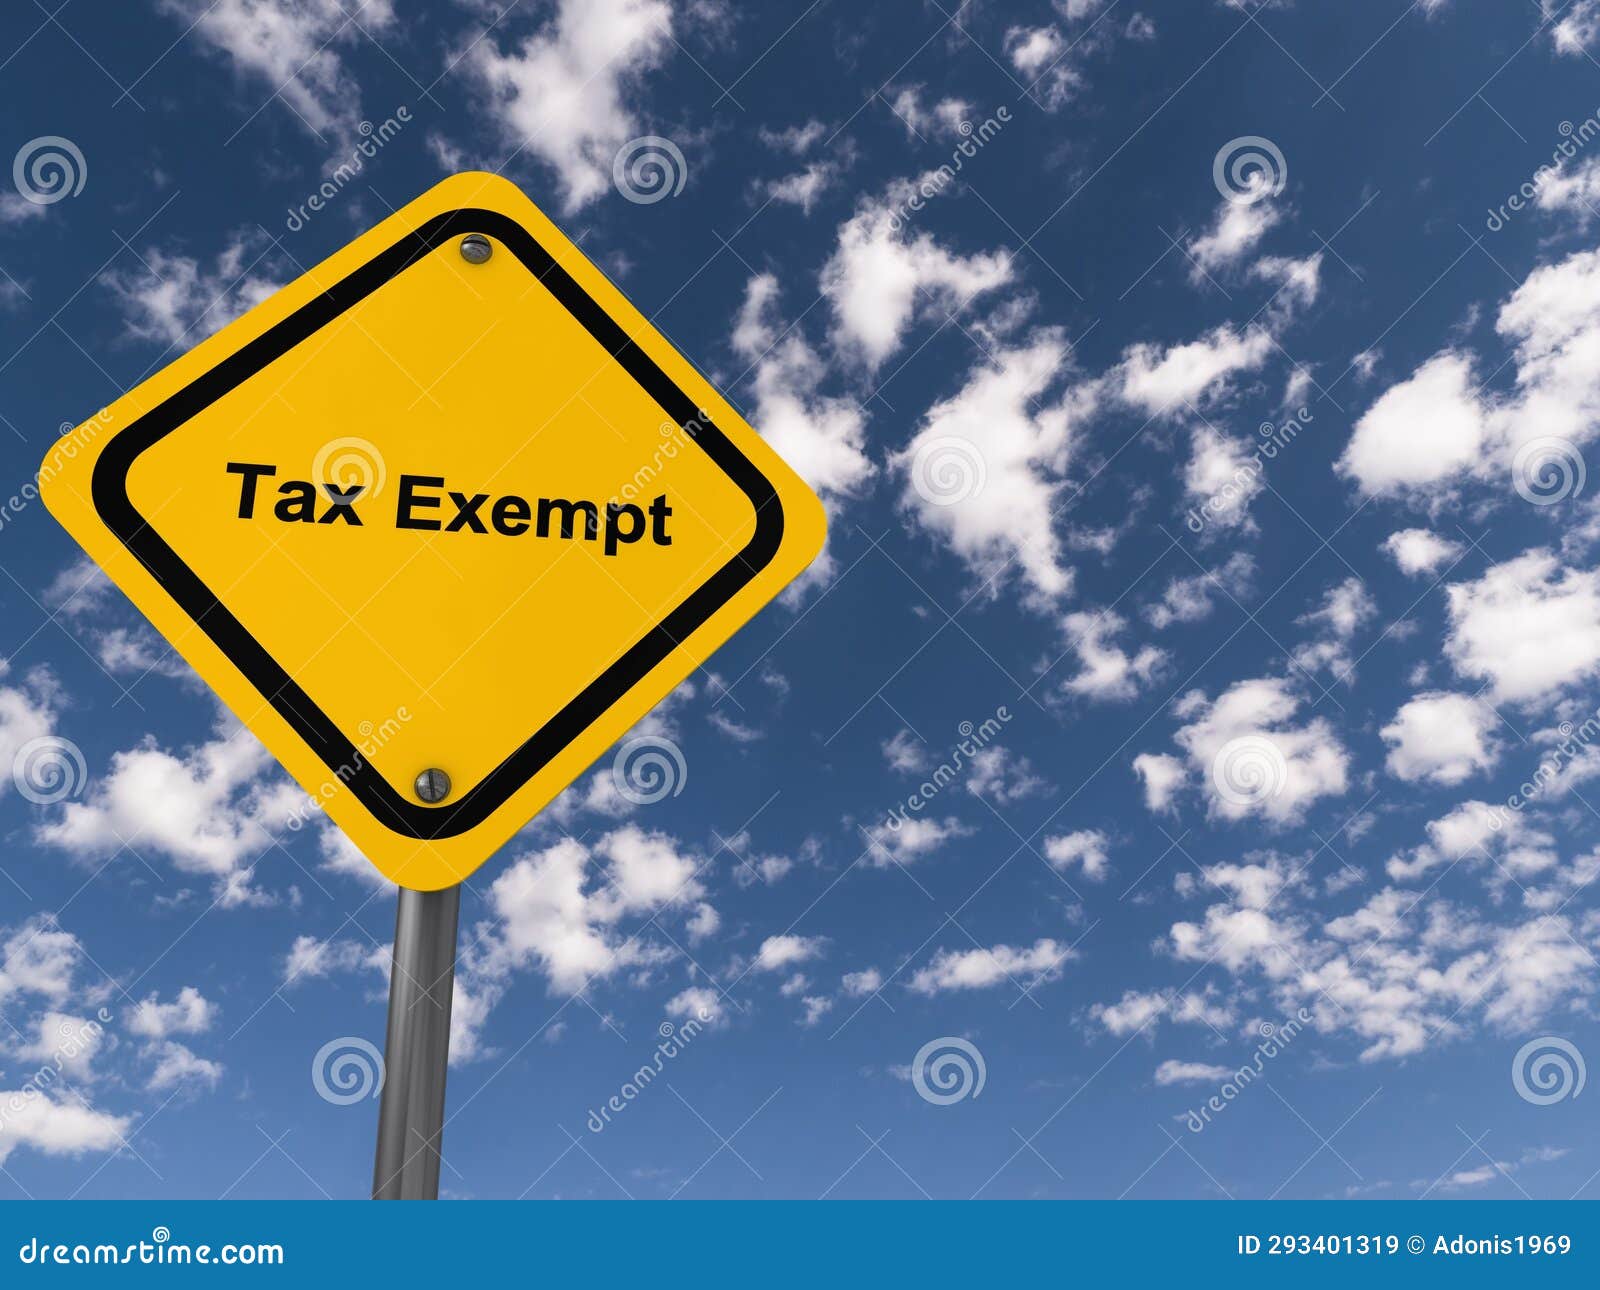 tax exempt traffic sign on blue sky